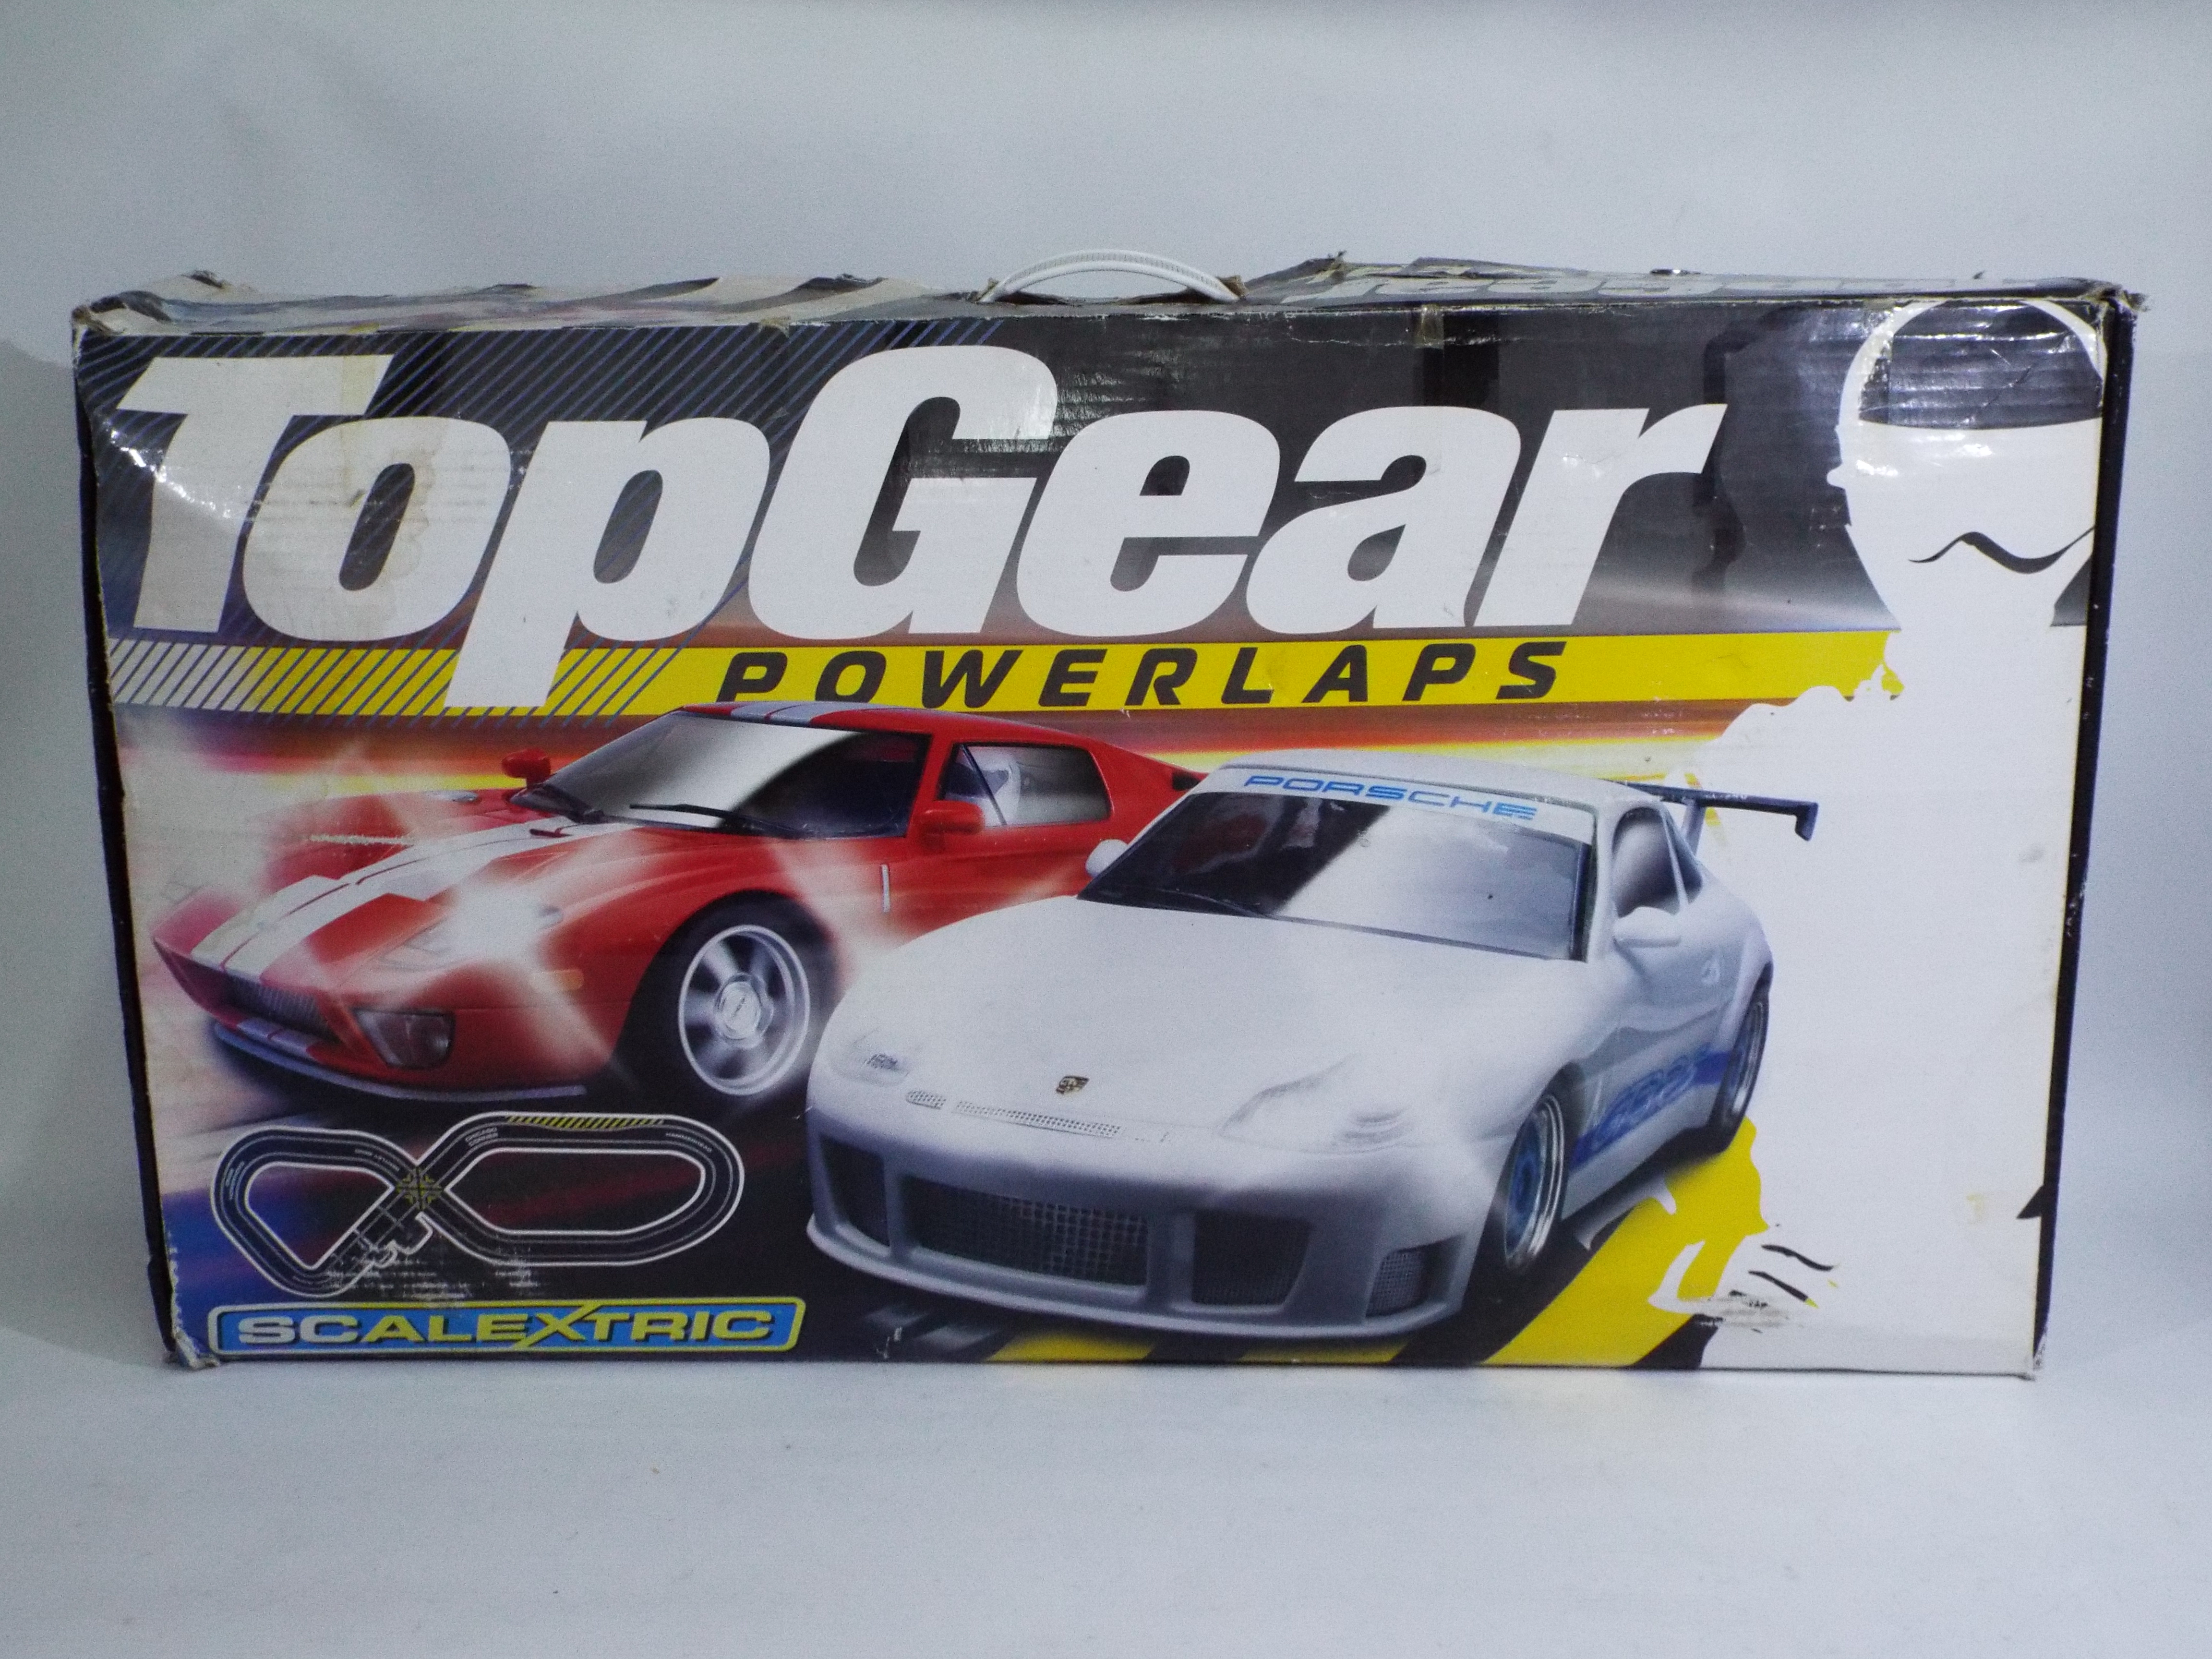 Scalextric - A boxed Scalextric Top Gear Power Laps racing set - The #C1218 racing set comes with